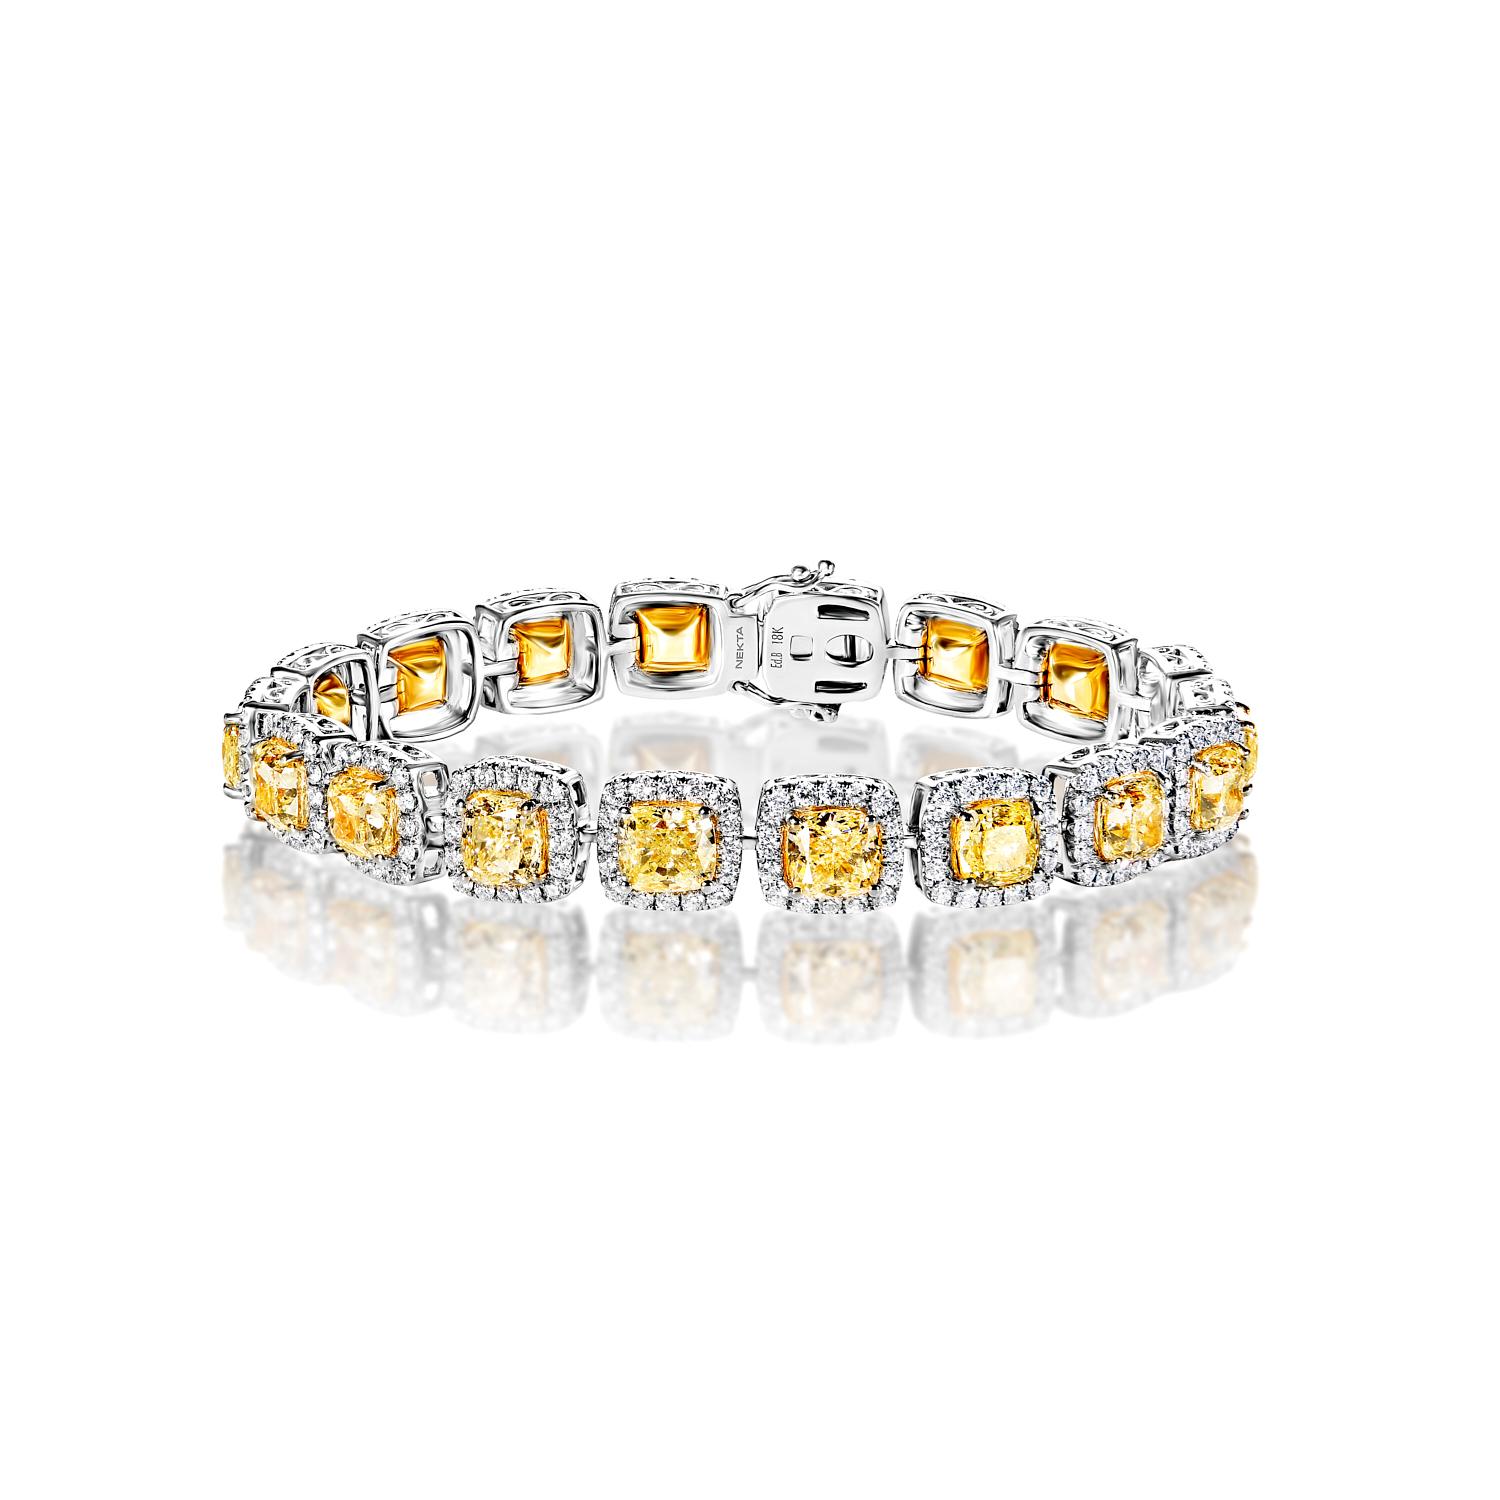 The CHARLEY 22.56 Carat Single Row Diamond Tennis Bracelet features CUSHION CUT DIAMONDS brilliants weighing a total of approximately 22.56 carats, set in 18K White Gold.

Style:
Diamonds
Diamond Size: 18.55 Carats
Color: Yellow
Diamond Shape: